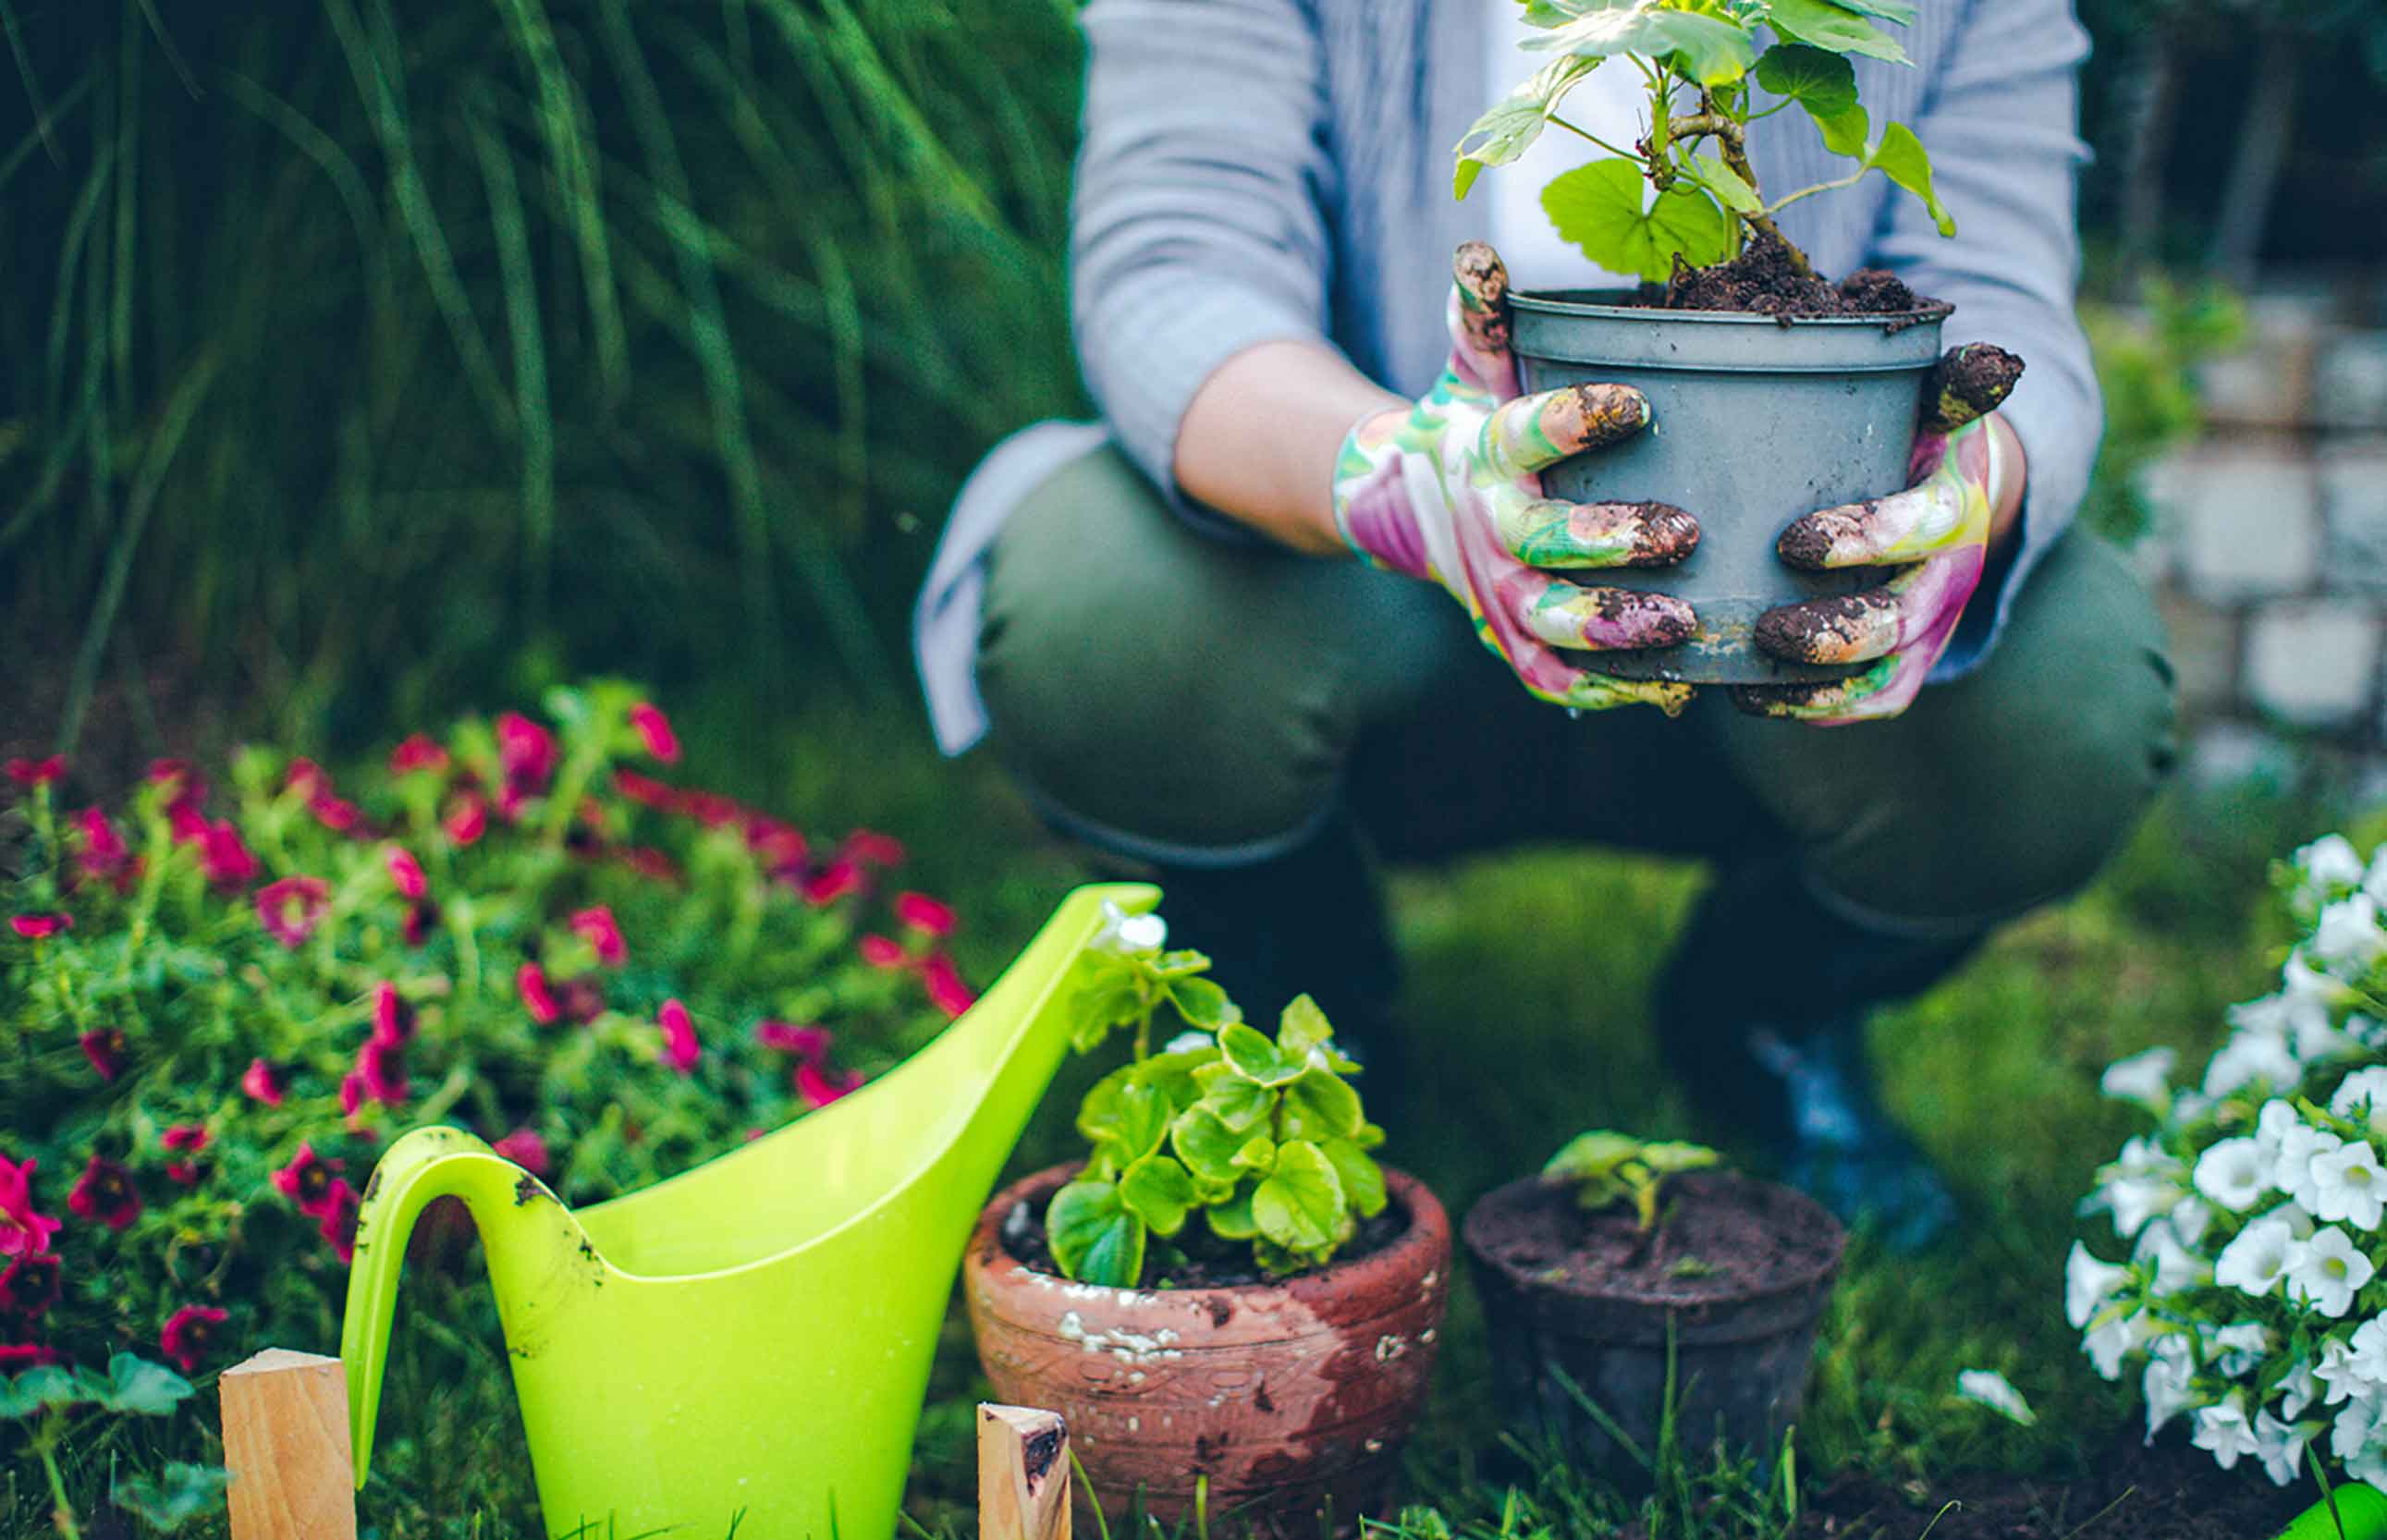 A summer garden can be a wonderful hobby and investment when you follow these money saving tips!